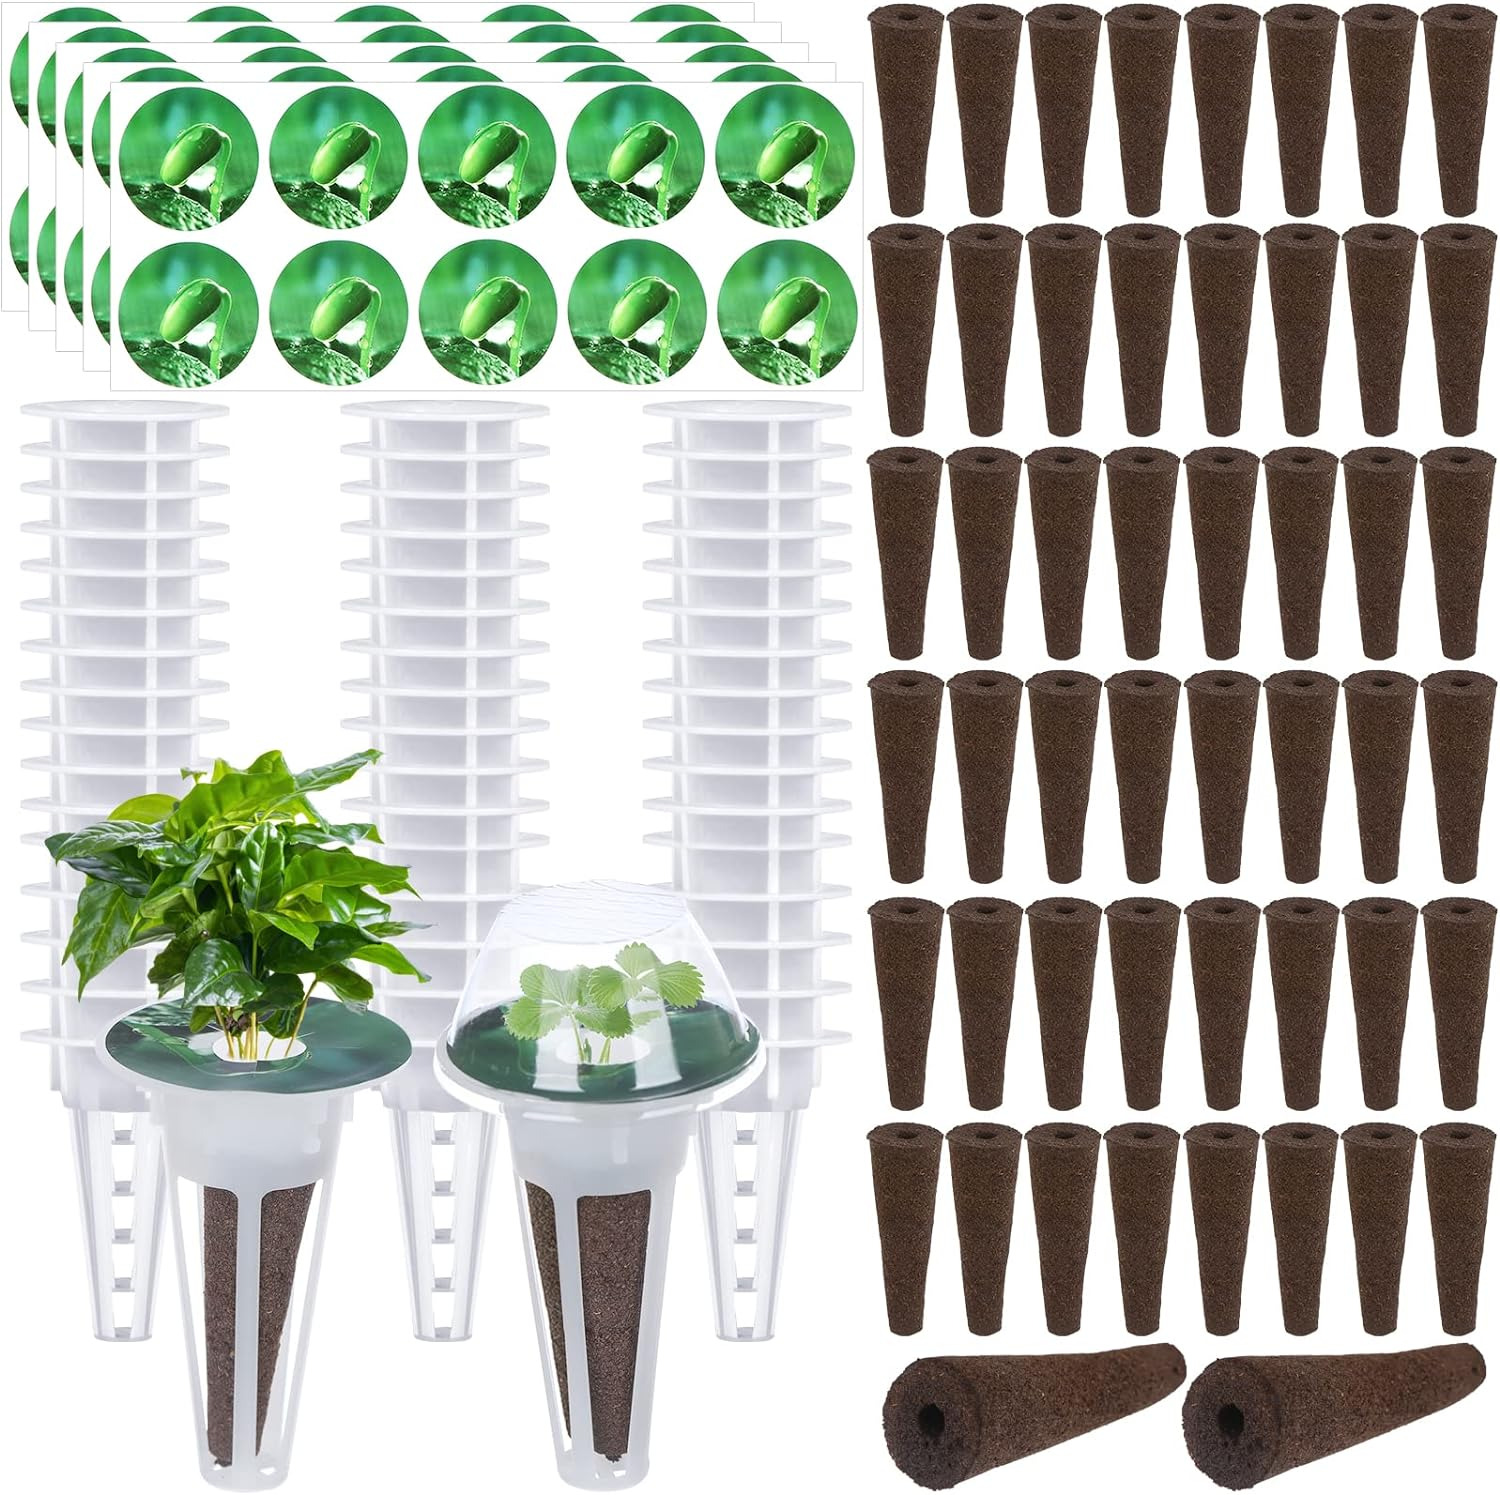 200 PCS Hydroponic Pod Kit for Aerogarden and All Brands Growing System, with 50